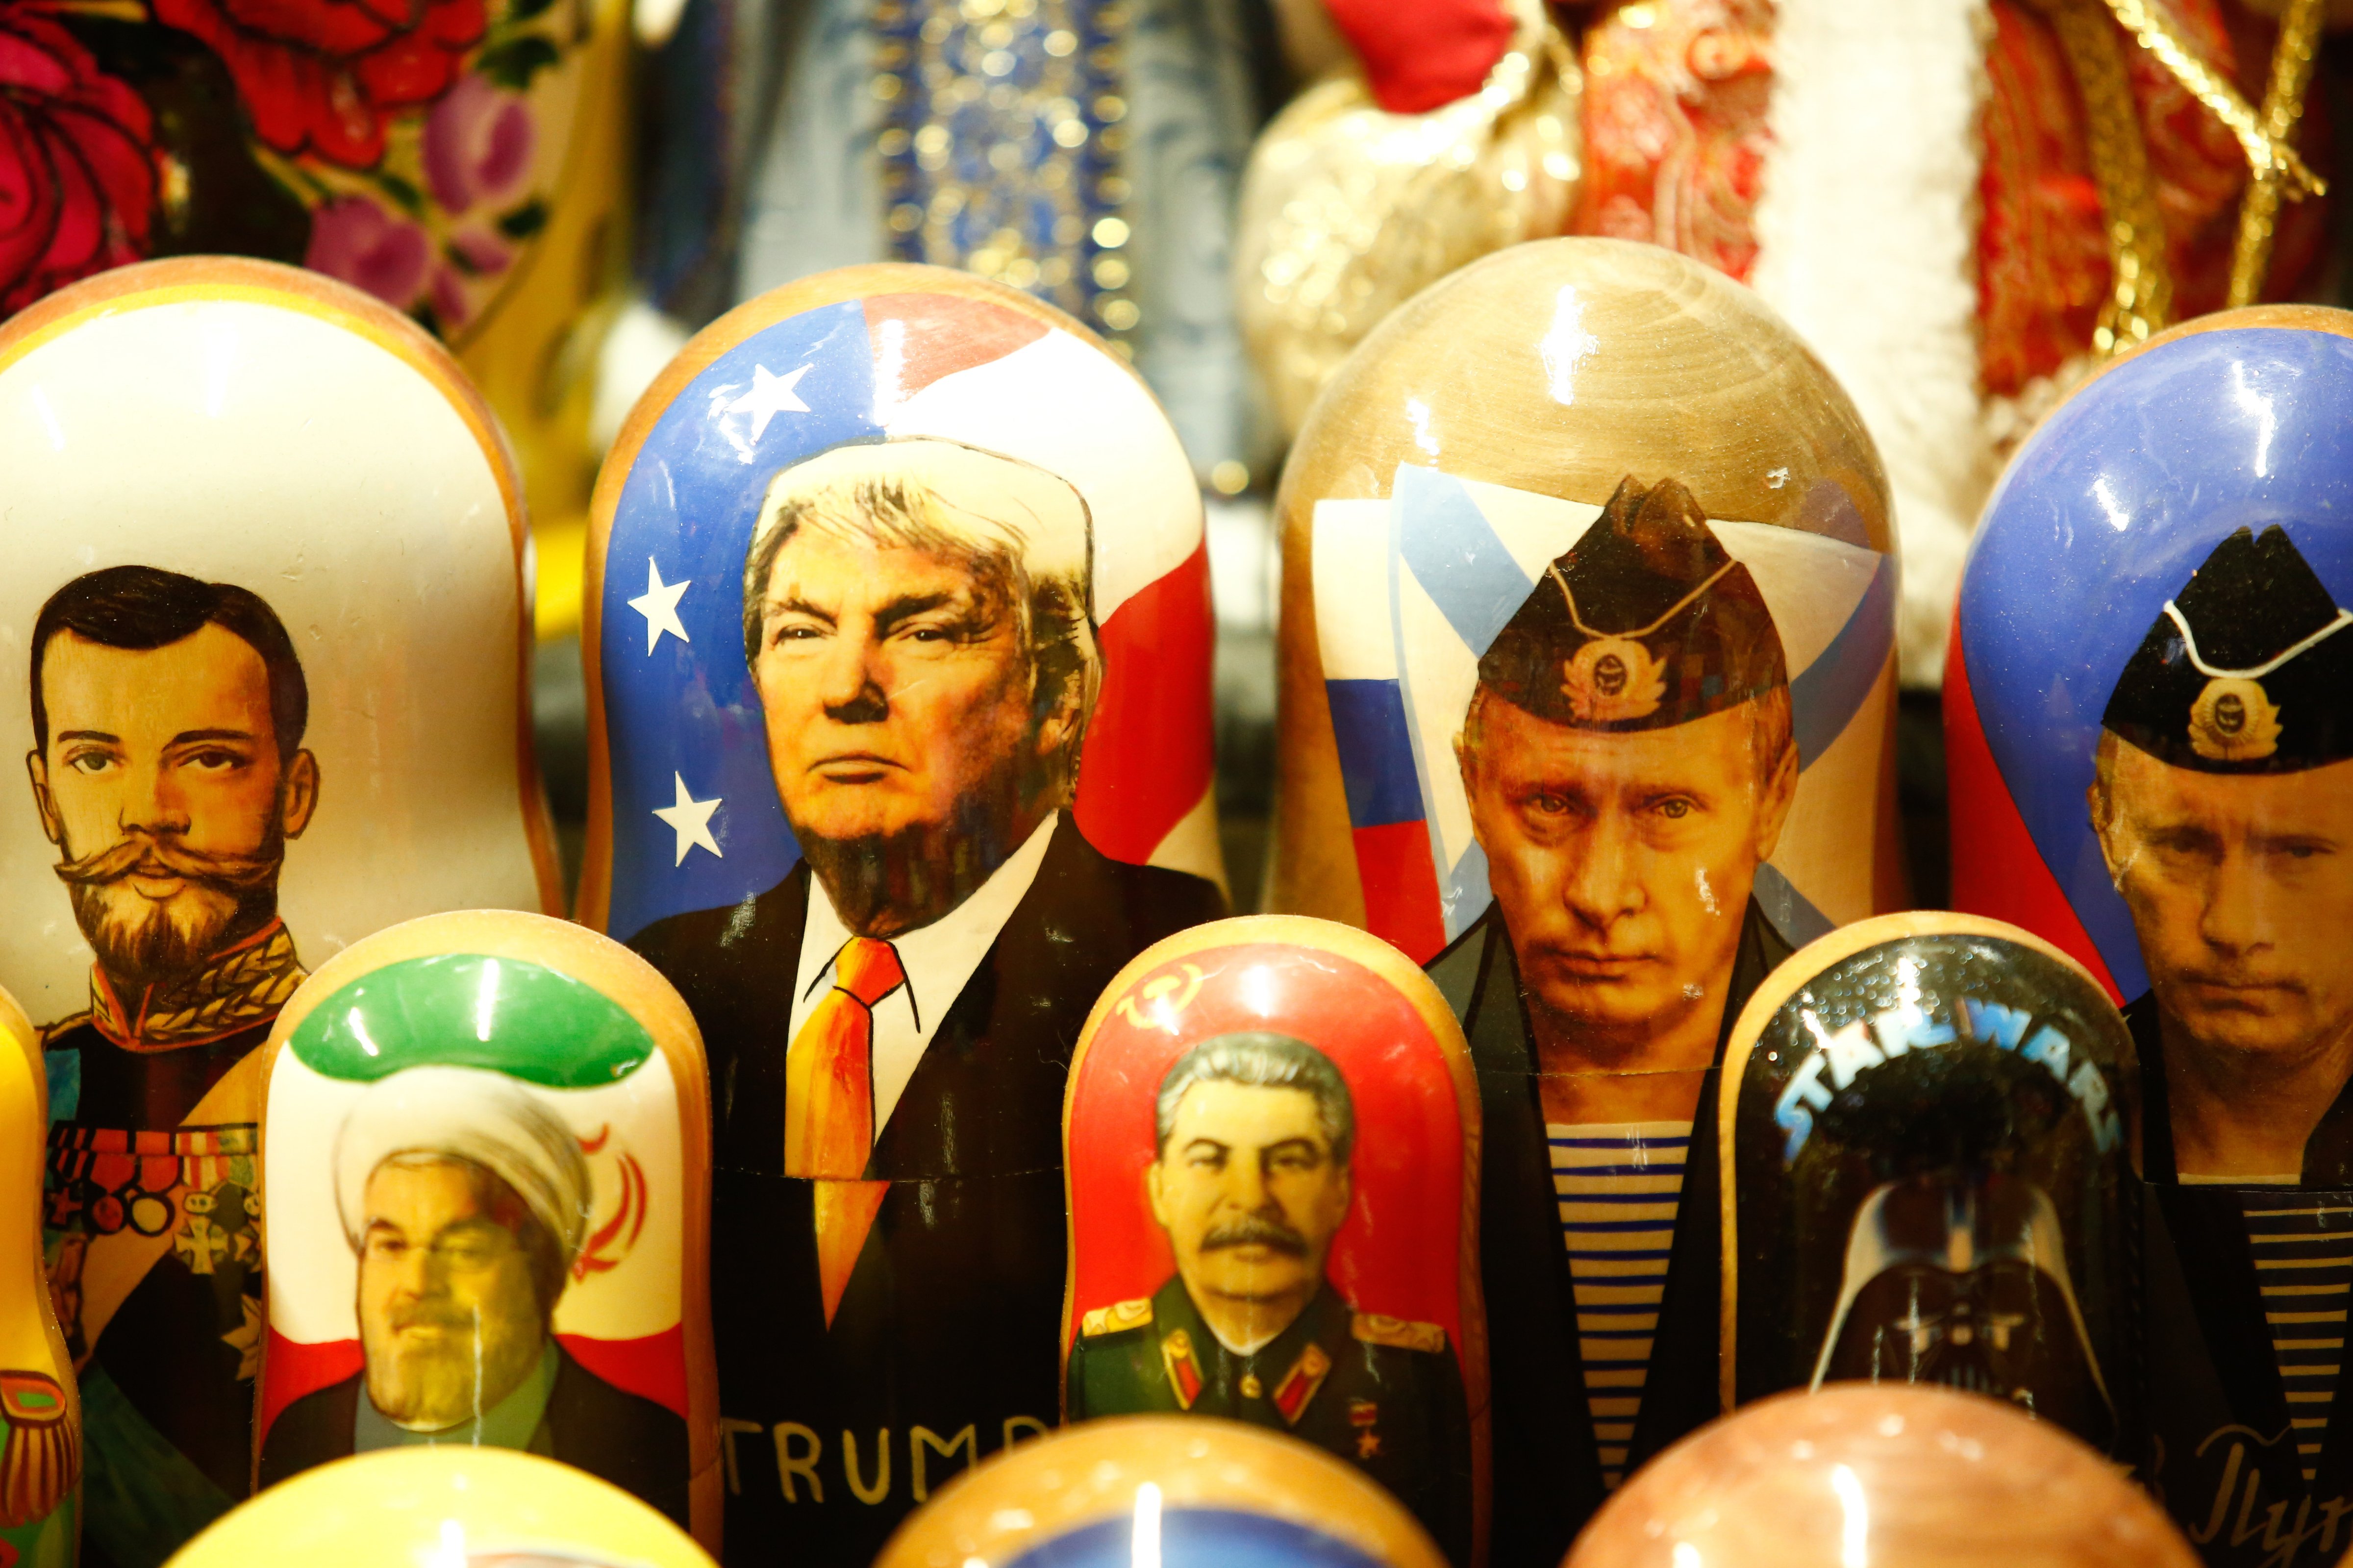 Russian nesting dolls depicting Putin and Trump on sale at a fair in St. Petersburg, Russia, on Dec. 29, 2019. (Sergei Mikhailichenko—SOPA/LightRocket/Getty Images)